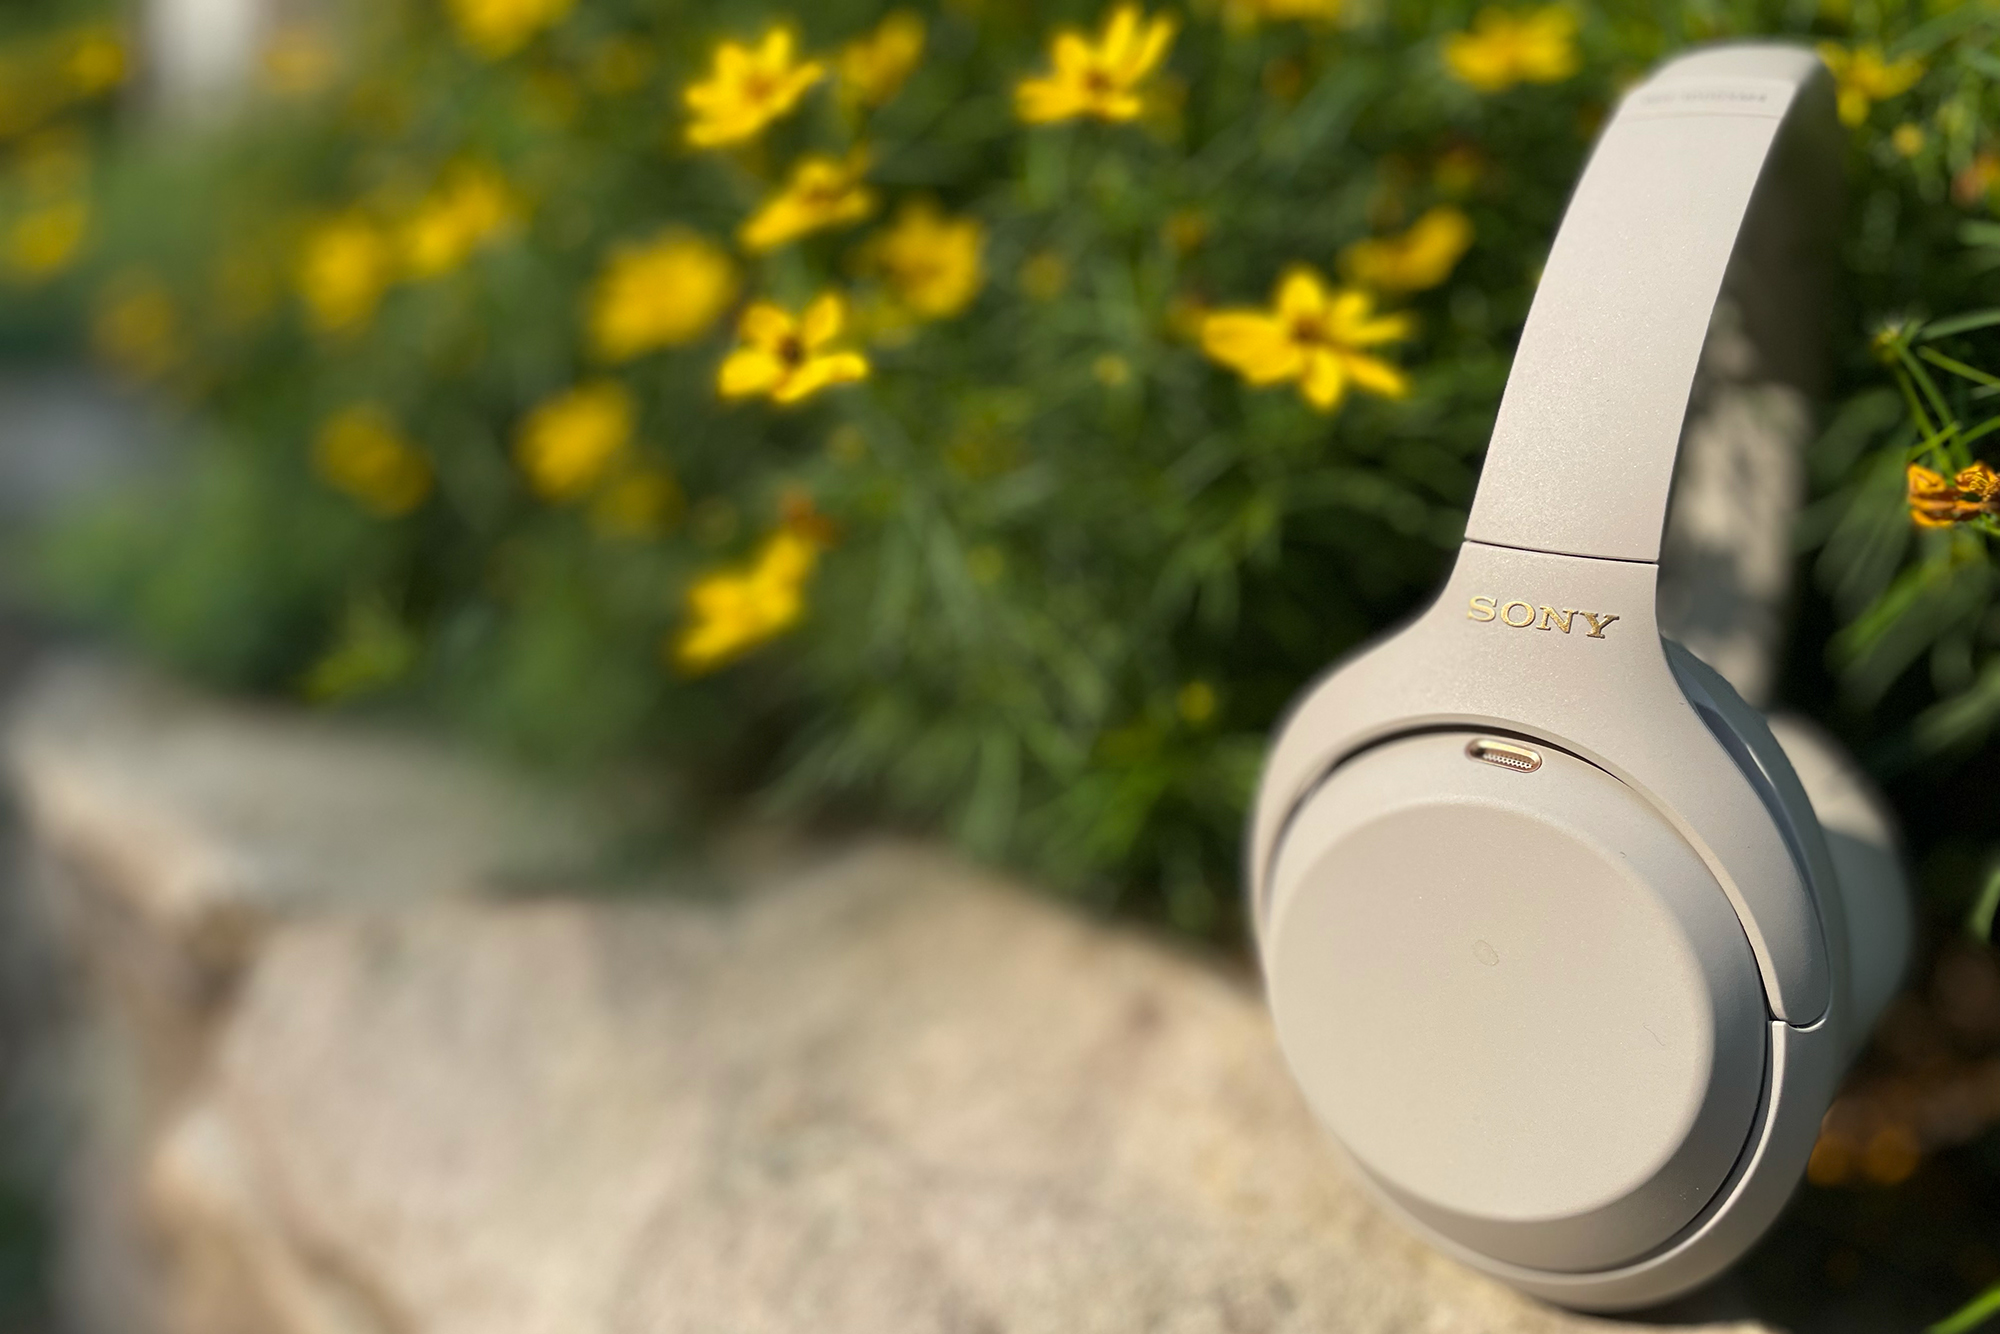 ven Forhandle Forenkle Sony WH-1000XM4 review: Noise-cancelling headphones you can live in